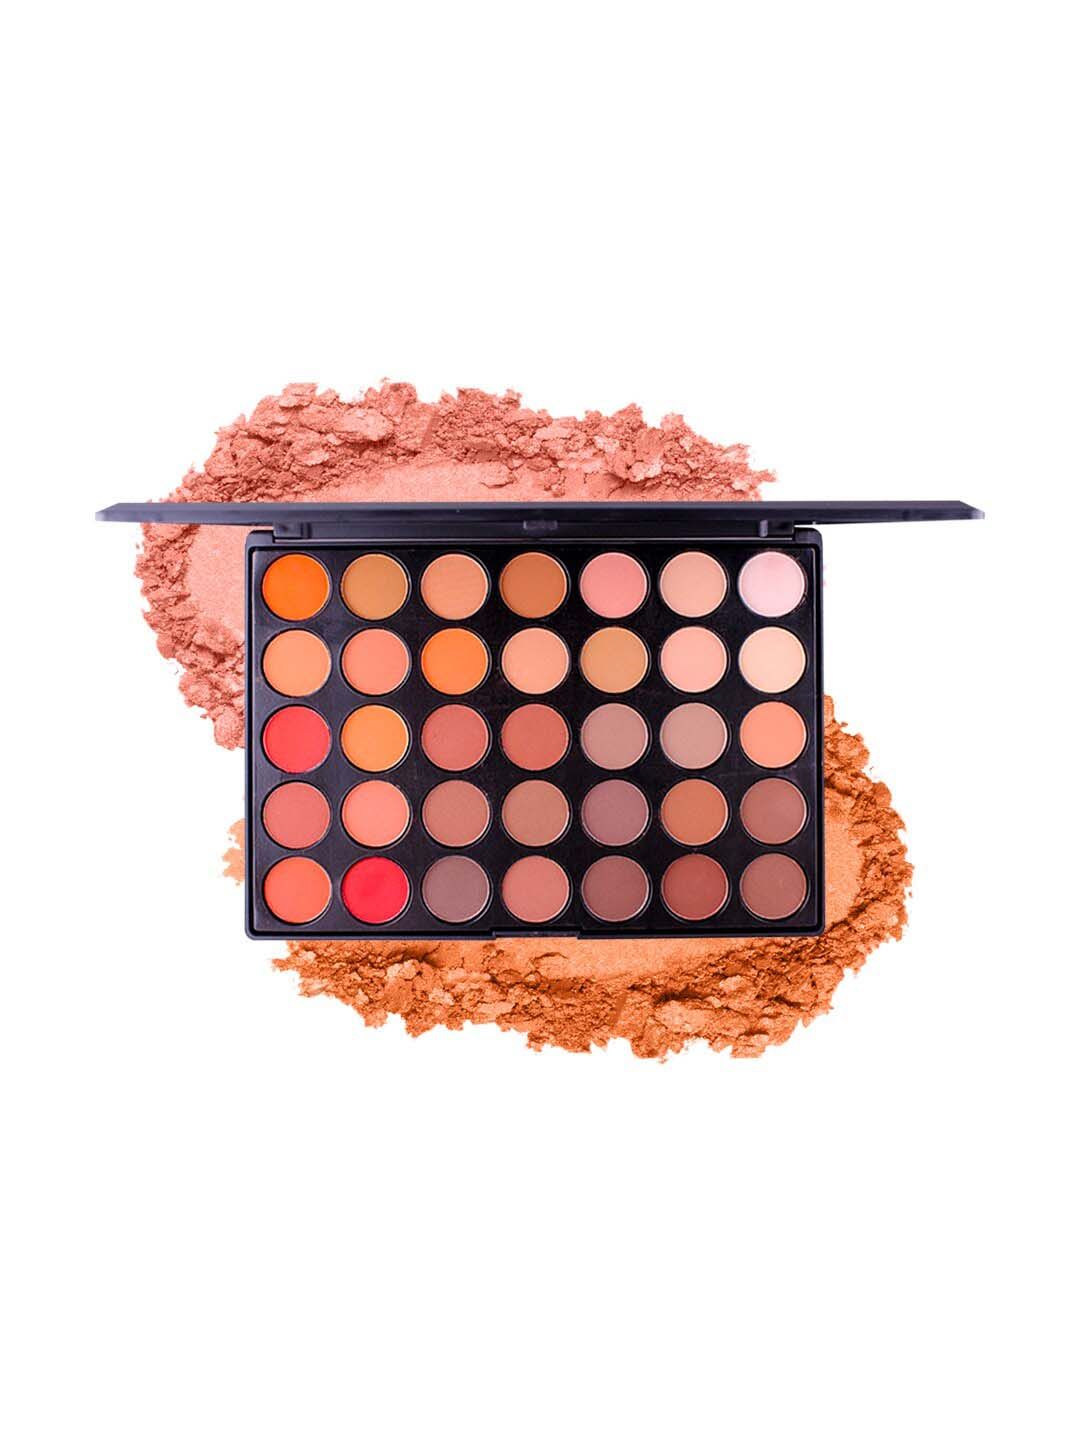 MISS ROSE 35 Color Matte Professional Eyeshadow Palette 7001-81 NY1 Price in India